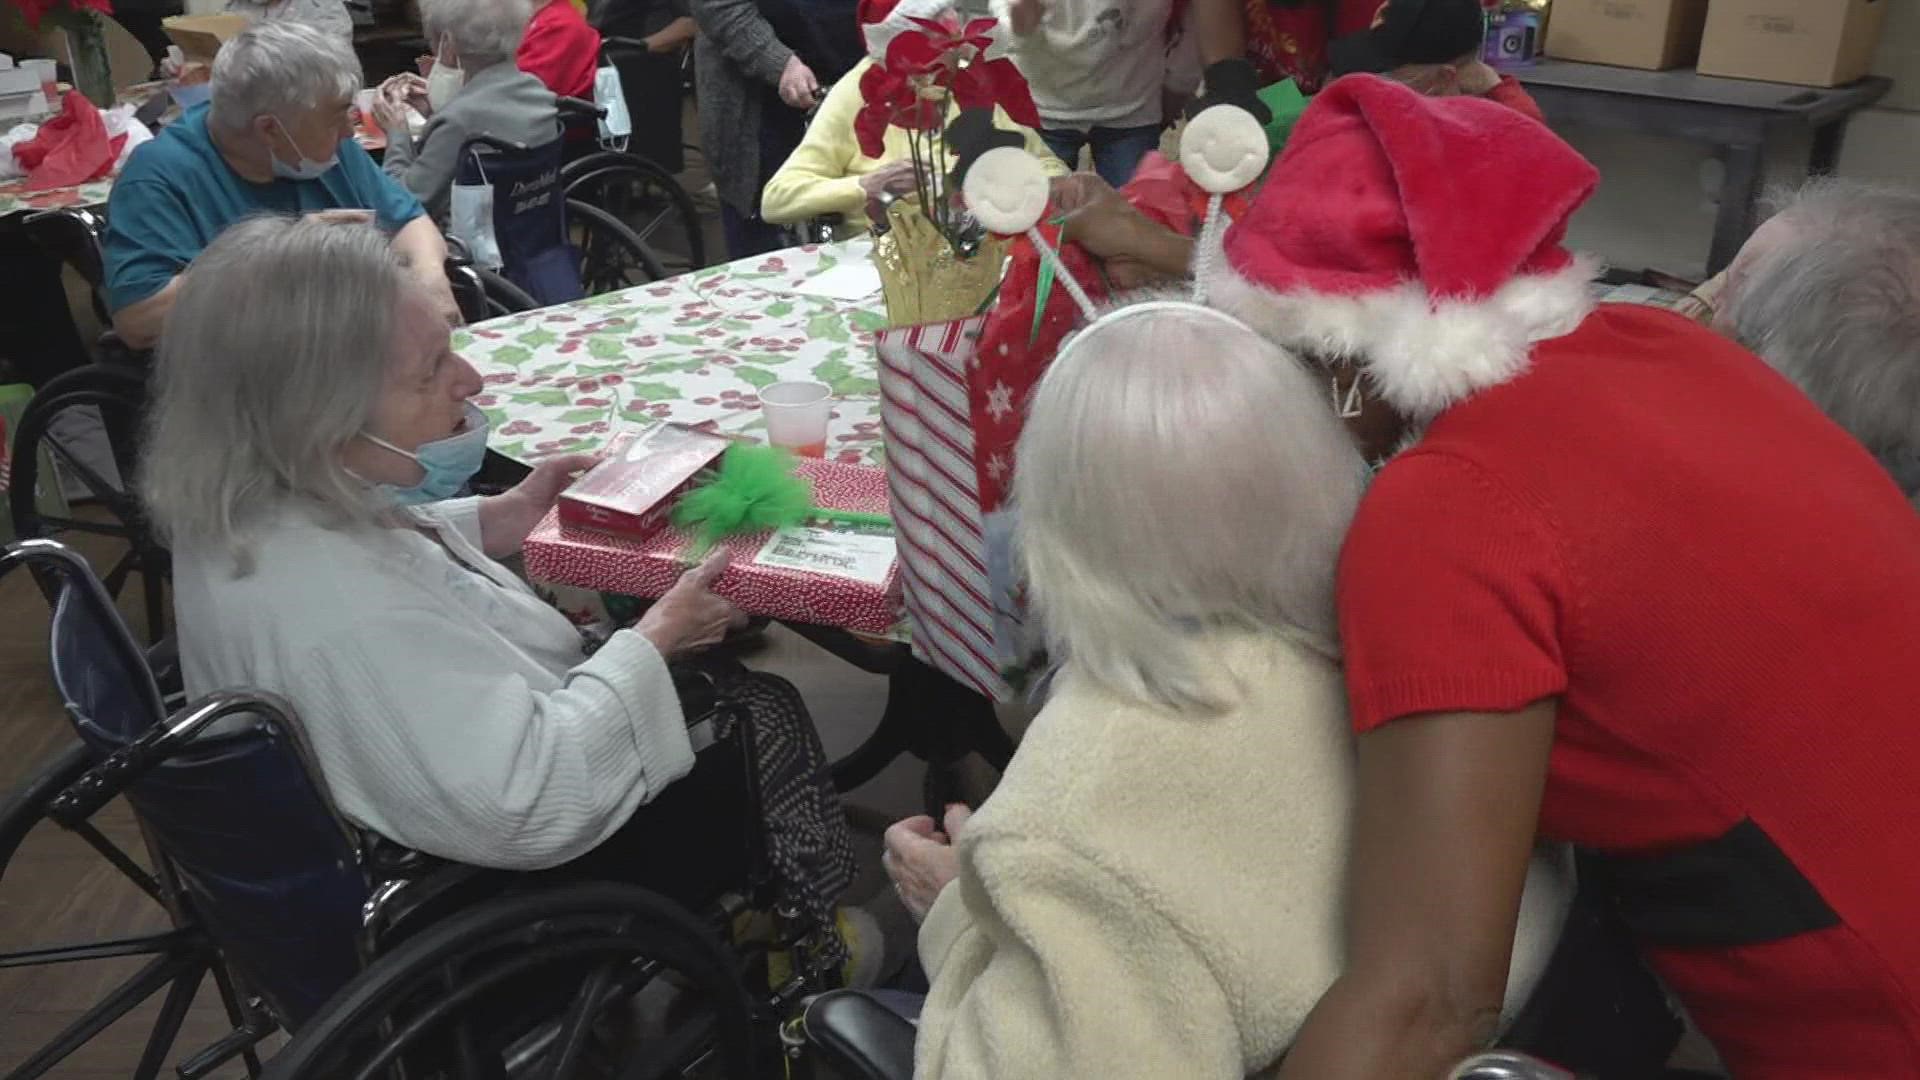 Senior citizens in Metairie are having a happy holiday after strangers provided them with gifts this Christmas a year after COVID kept them from celebrating.